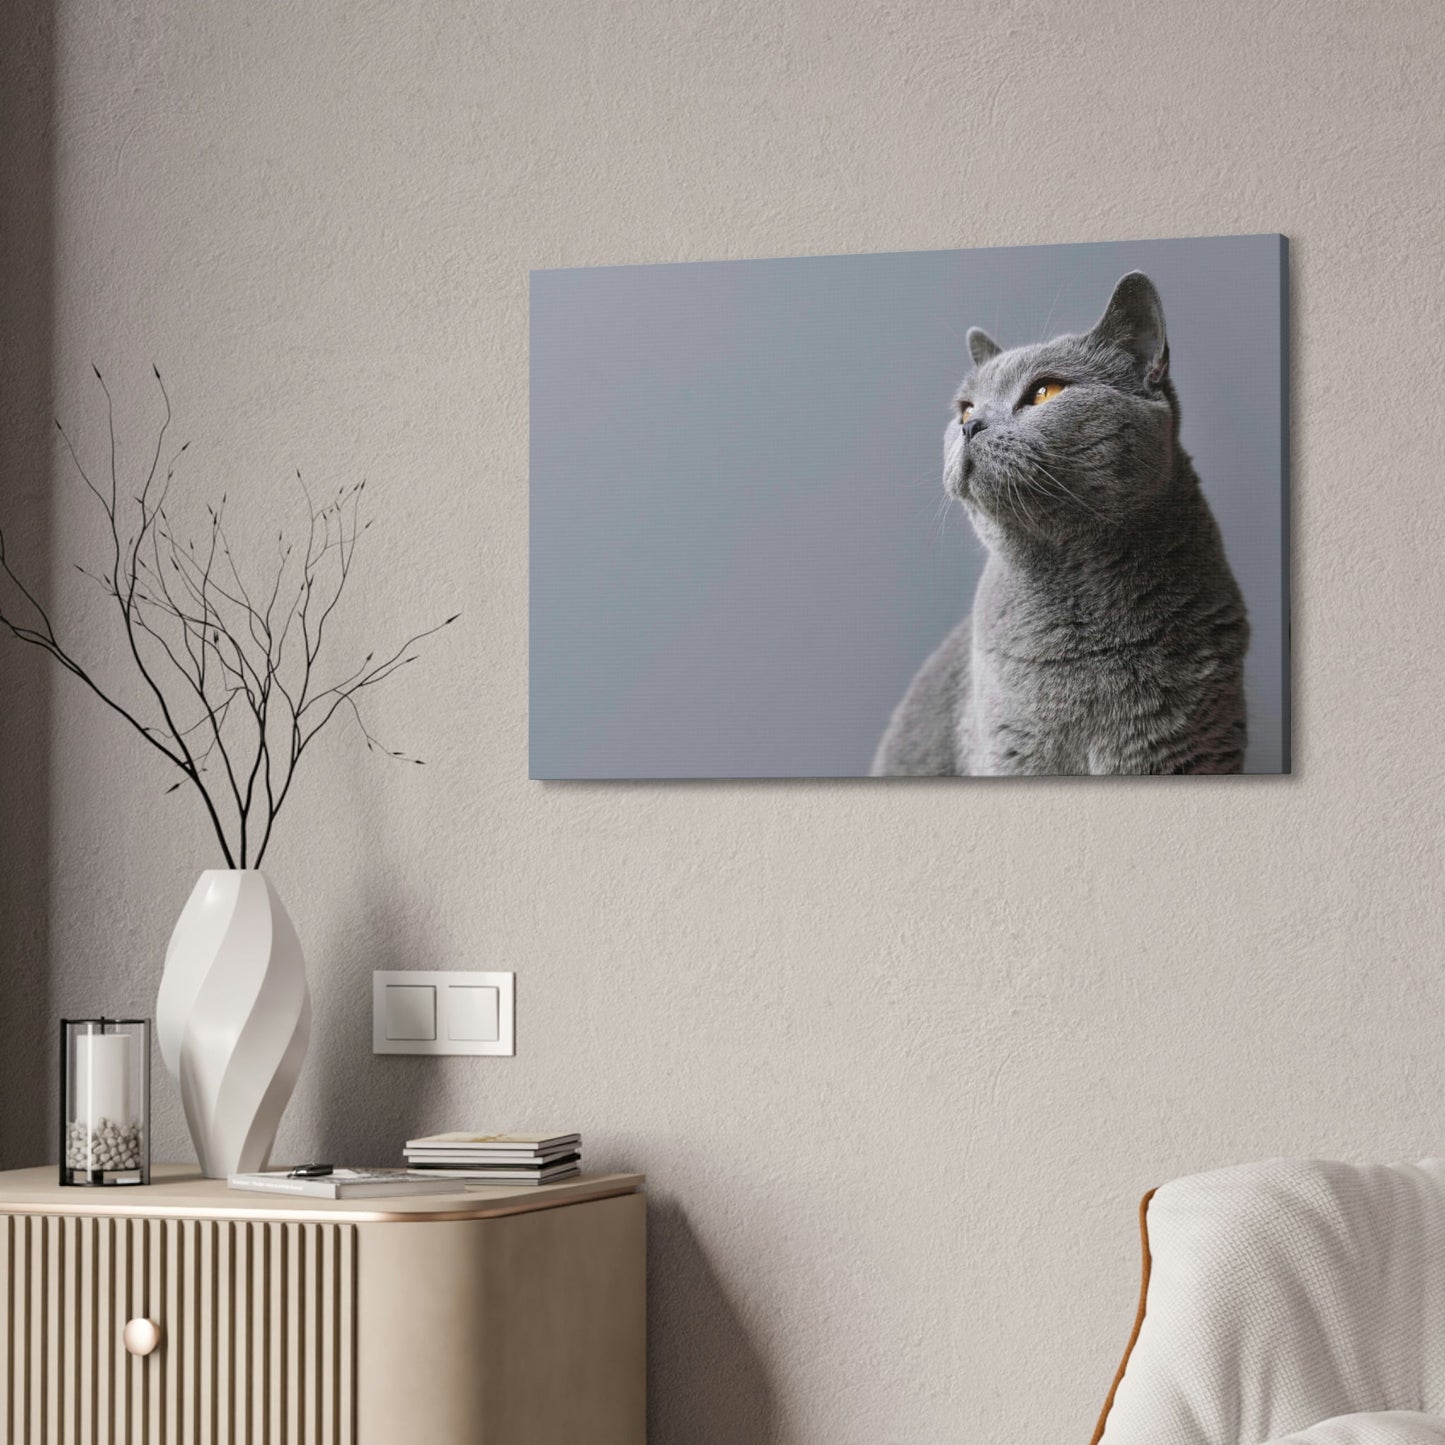 Feline Finesse: Artistic Cat Depictions on Natural Canvas & Posters